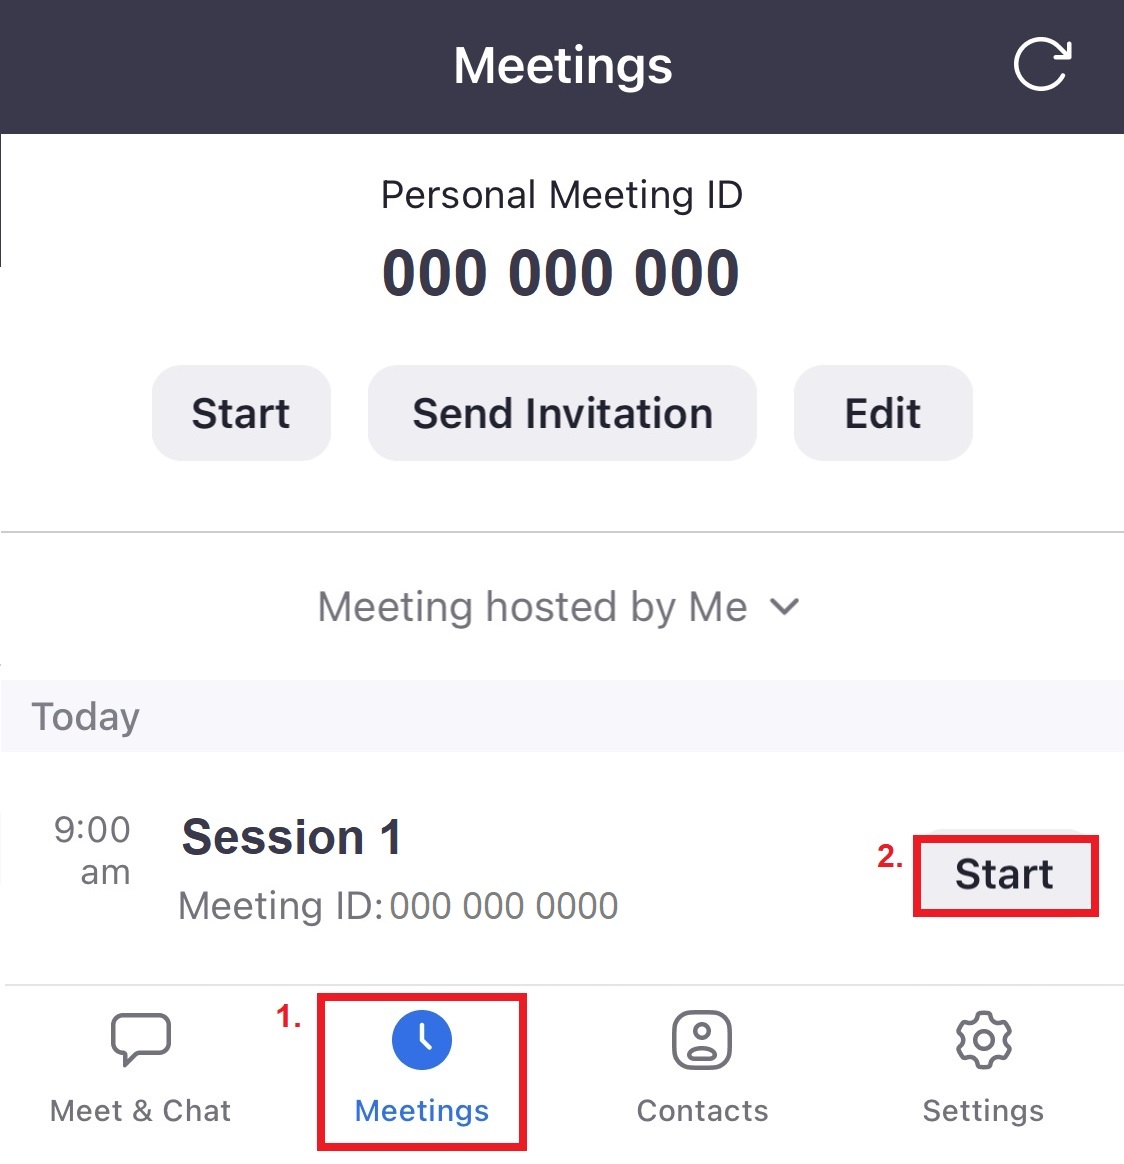 Select Meeting and and Start Meeting